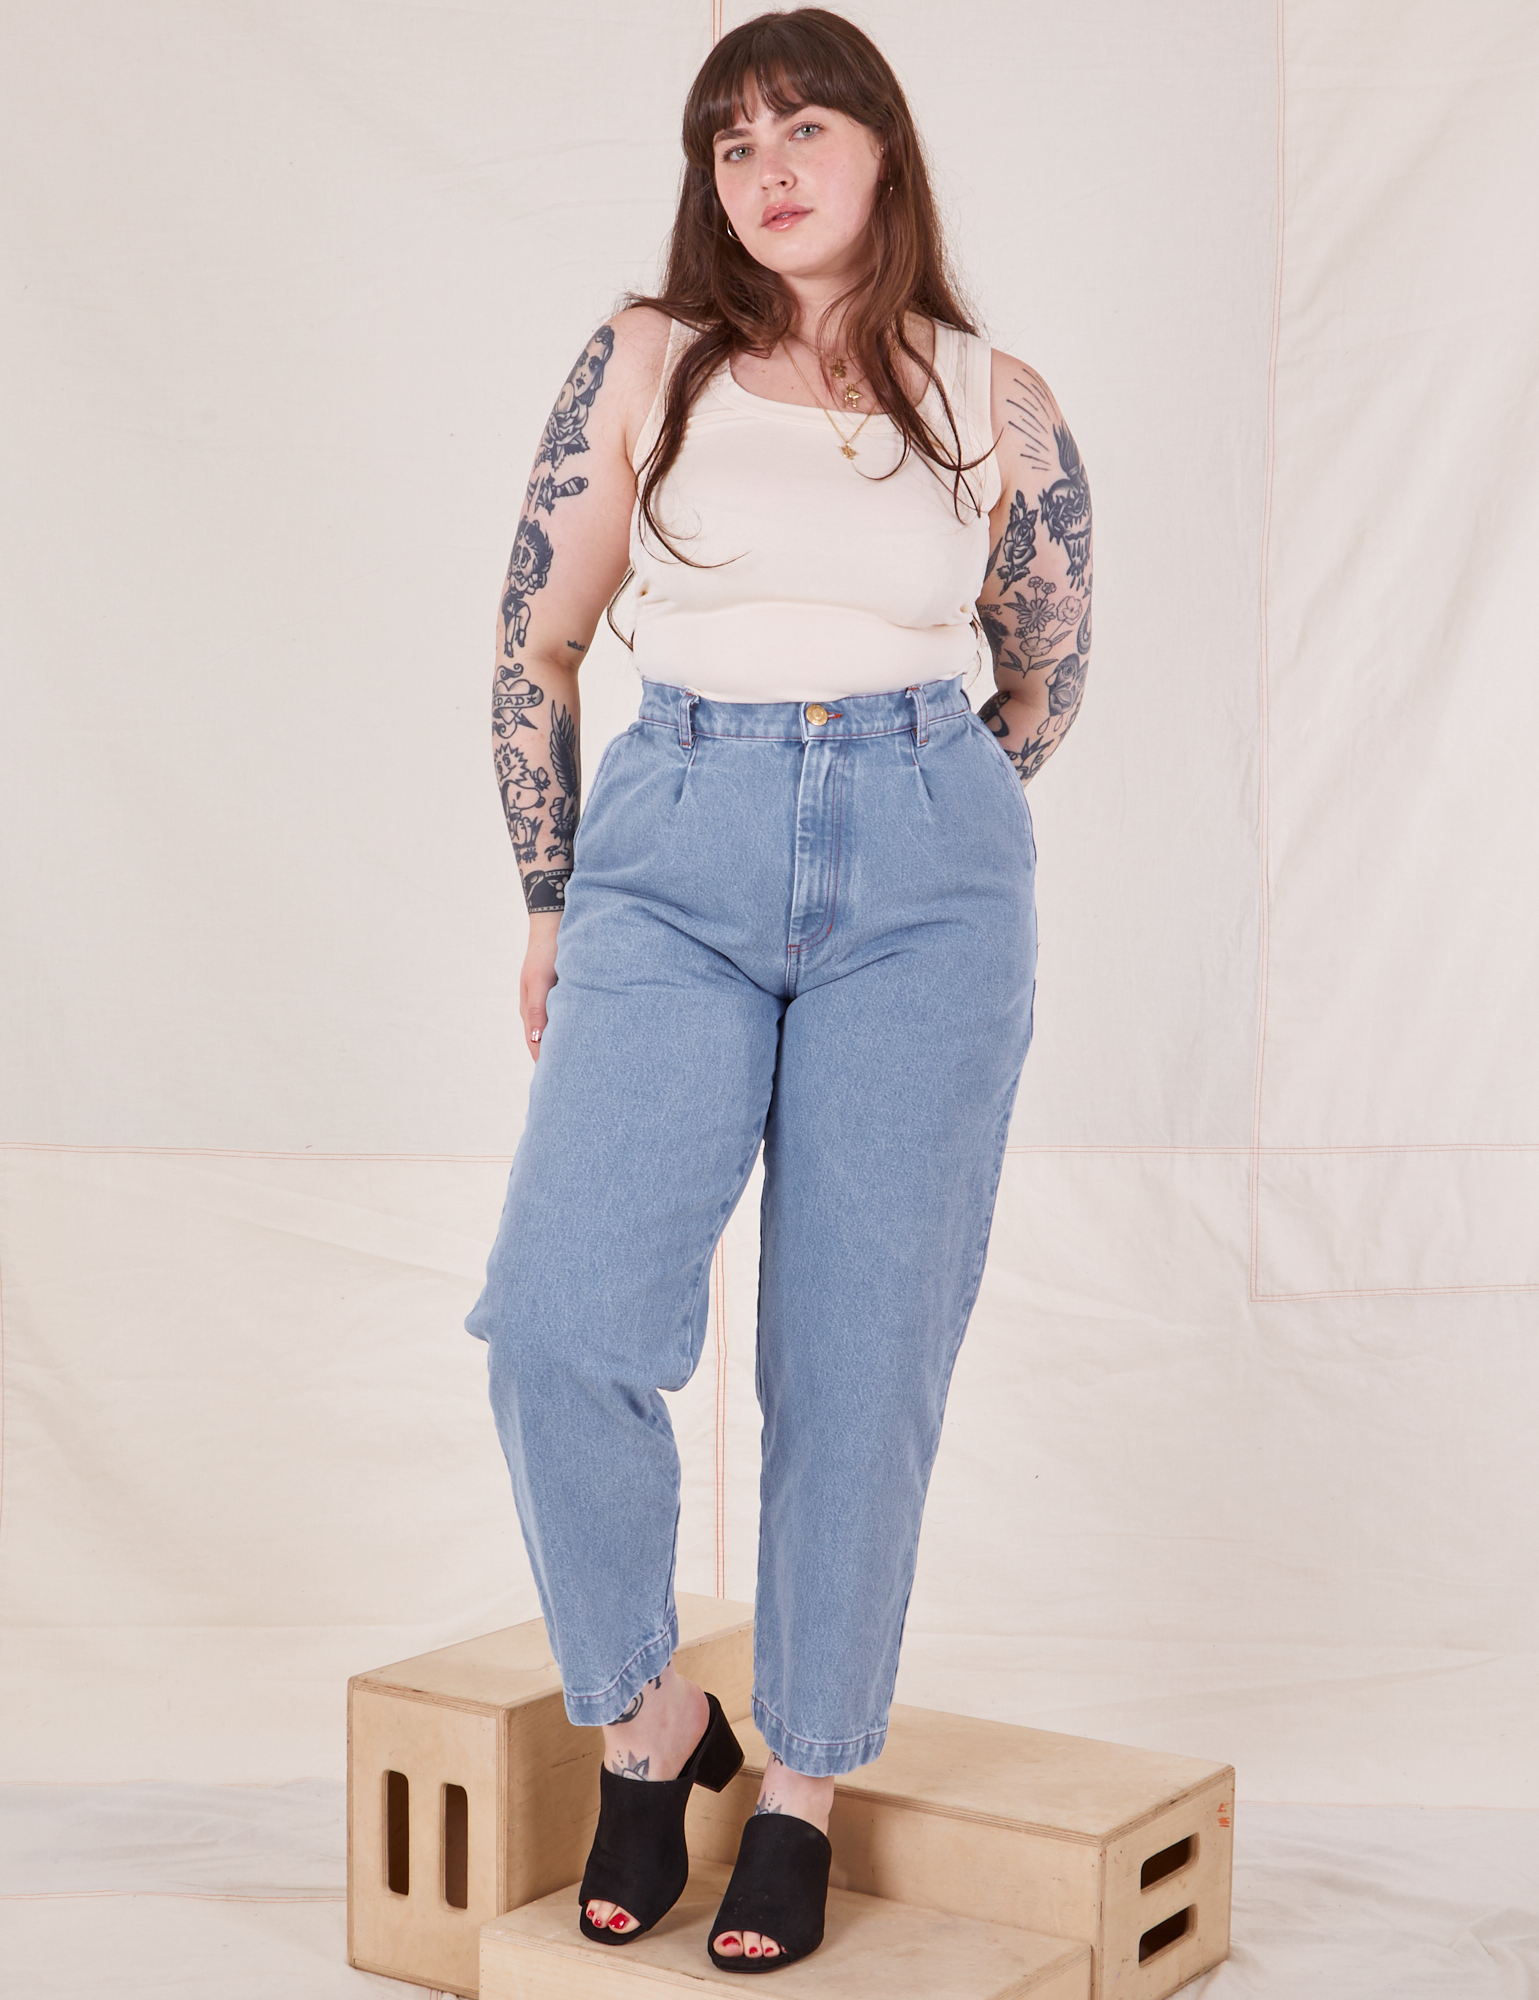 Sydney is 5&#39;9&quot; and wearing M Denim Trouser Jeans in Light Wash paired with vintage off-white Tank Top